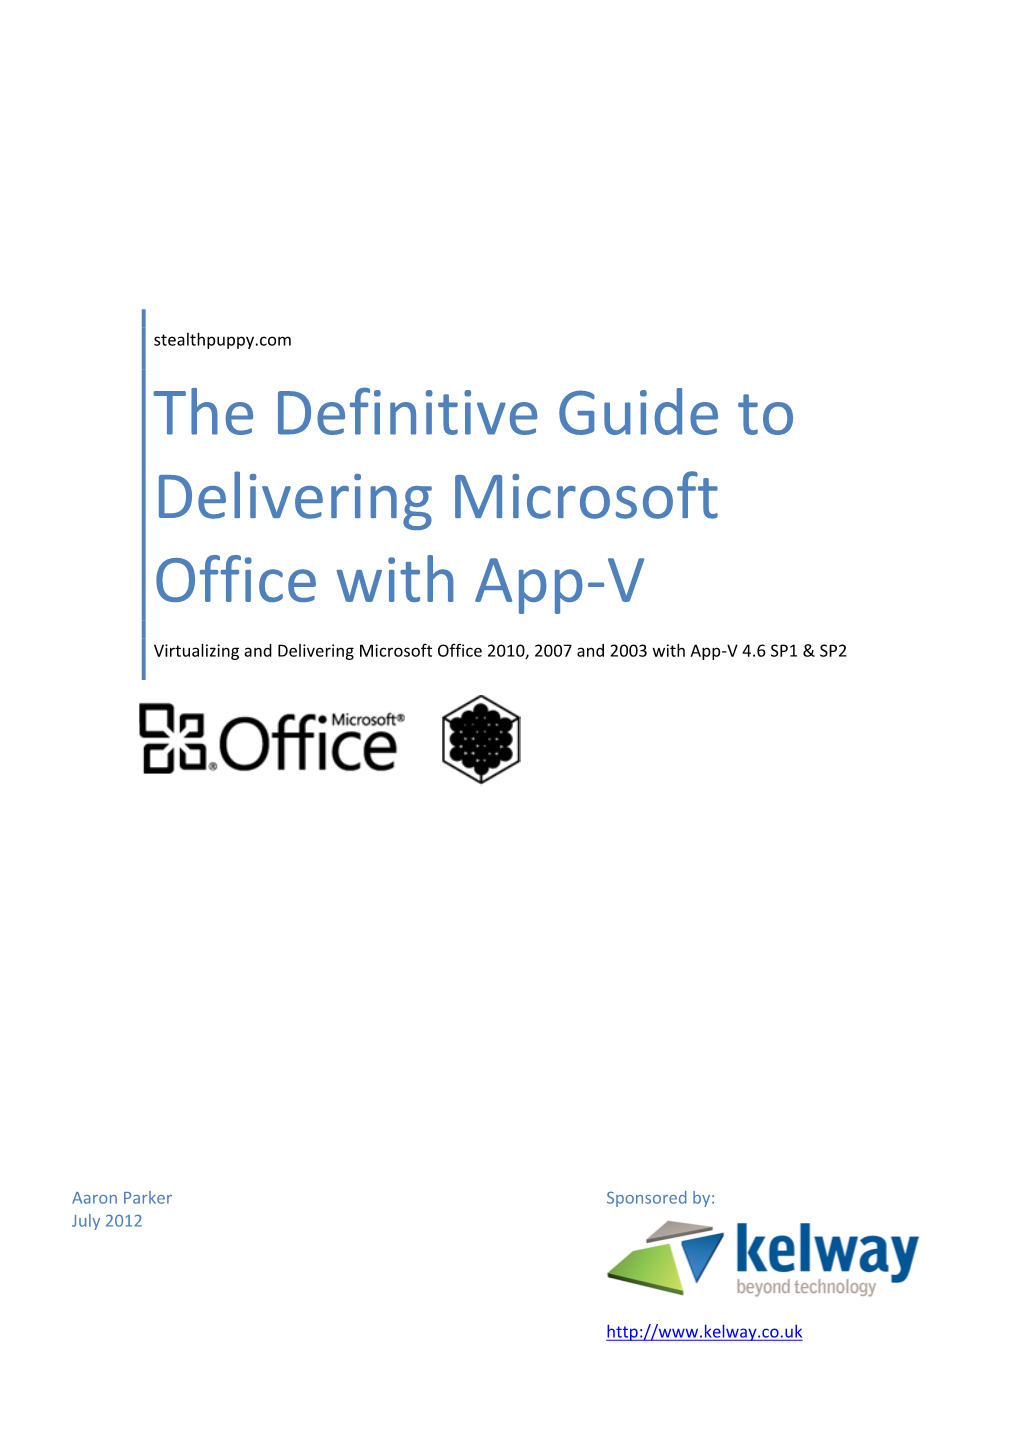 The Definitive Guide to Delivering Microsoft Office with App-V